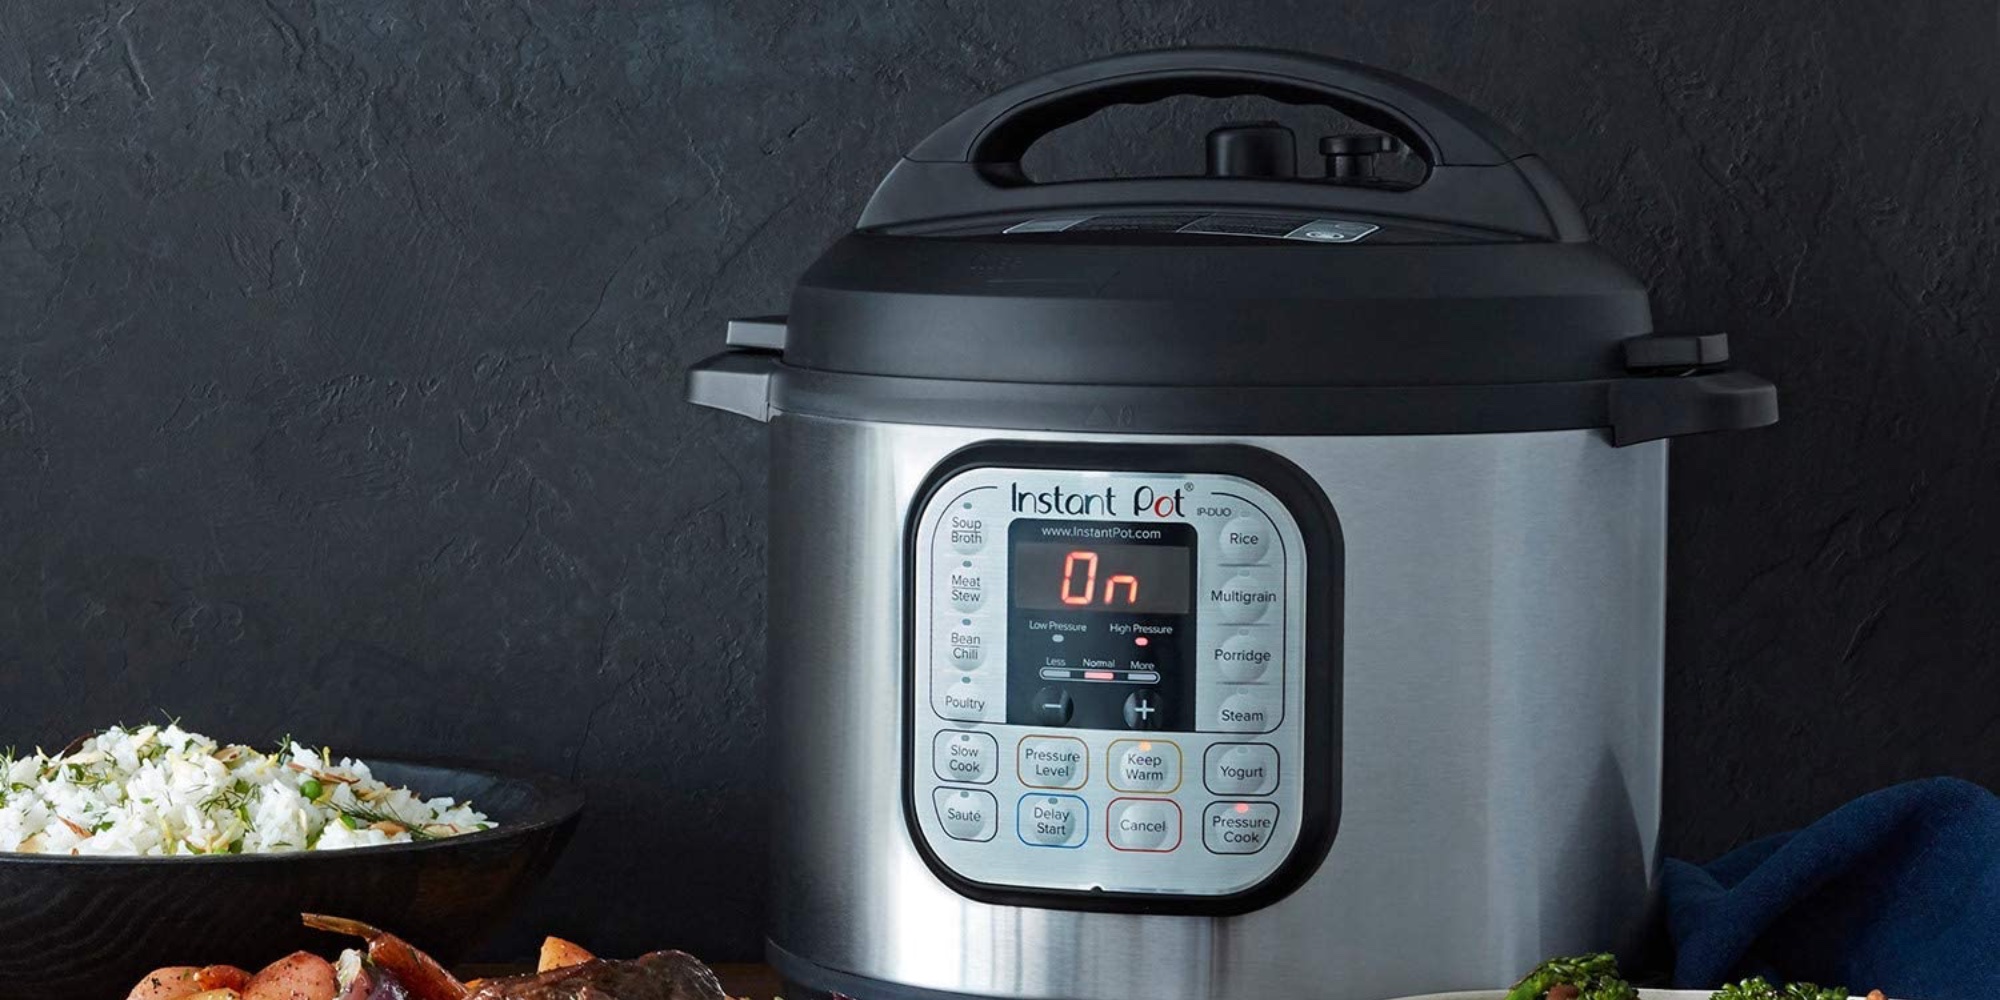 https://9to5toys.com/wp-content/uploads/sites/5/2021/05/Instant-Pot-Duo-.jpg